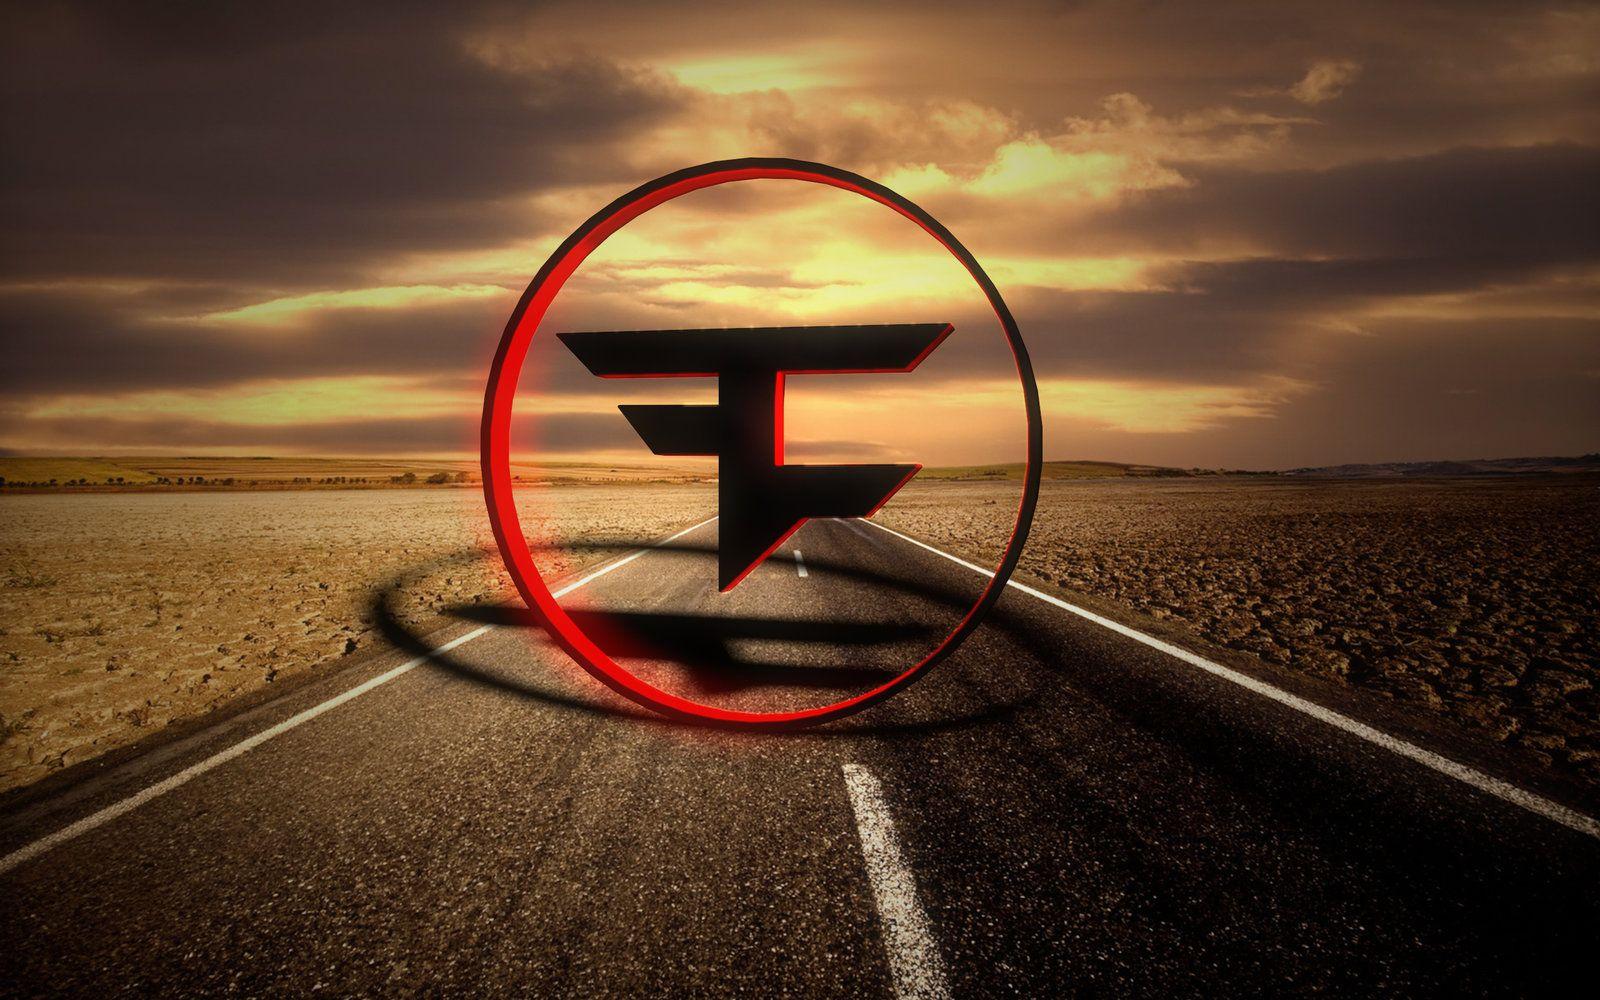 Collection of Faze Clan Wallpapers on HDWallpapers